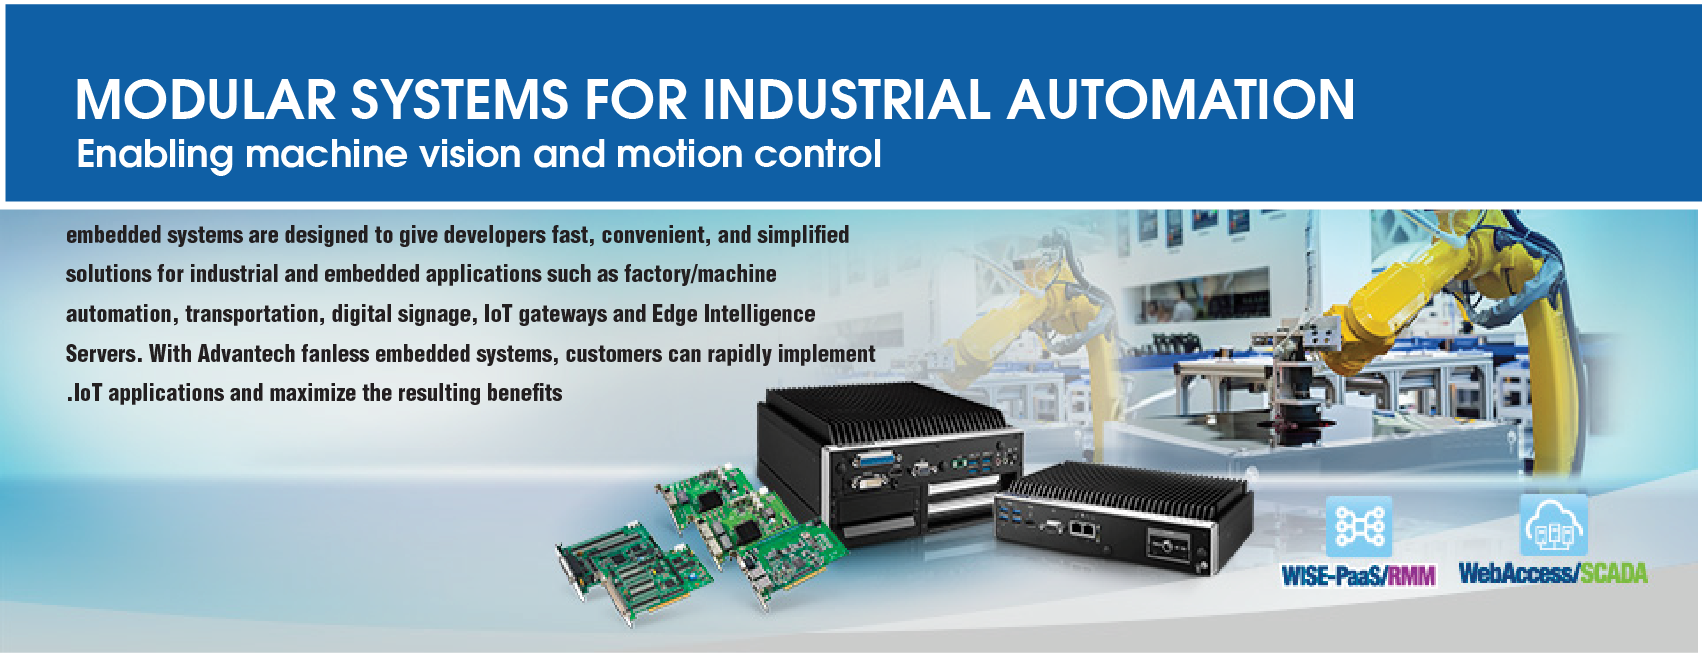 Modular Systems for Industrial Automation